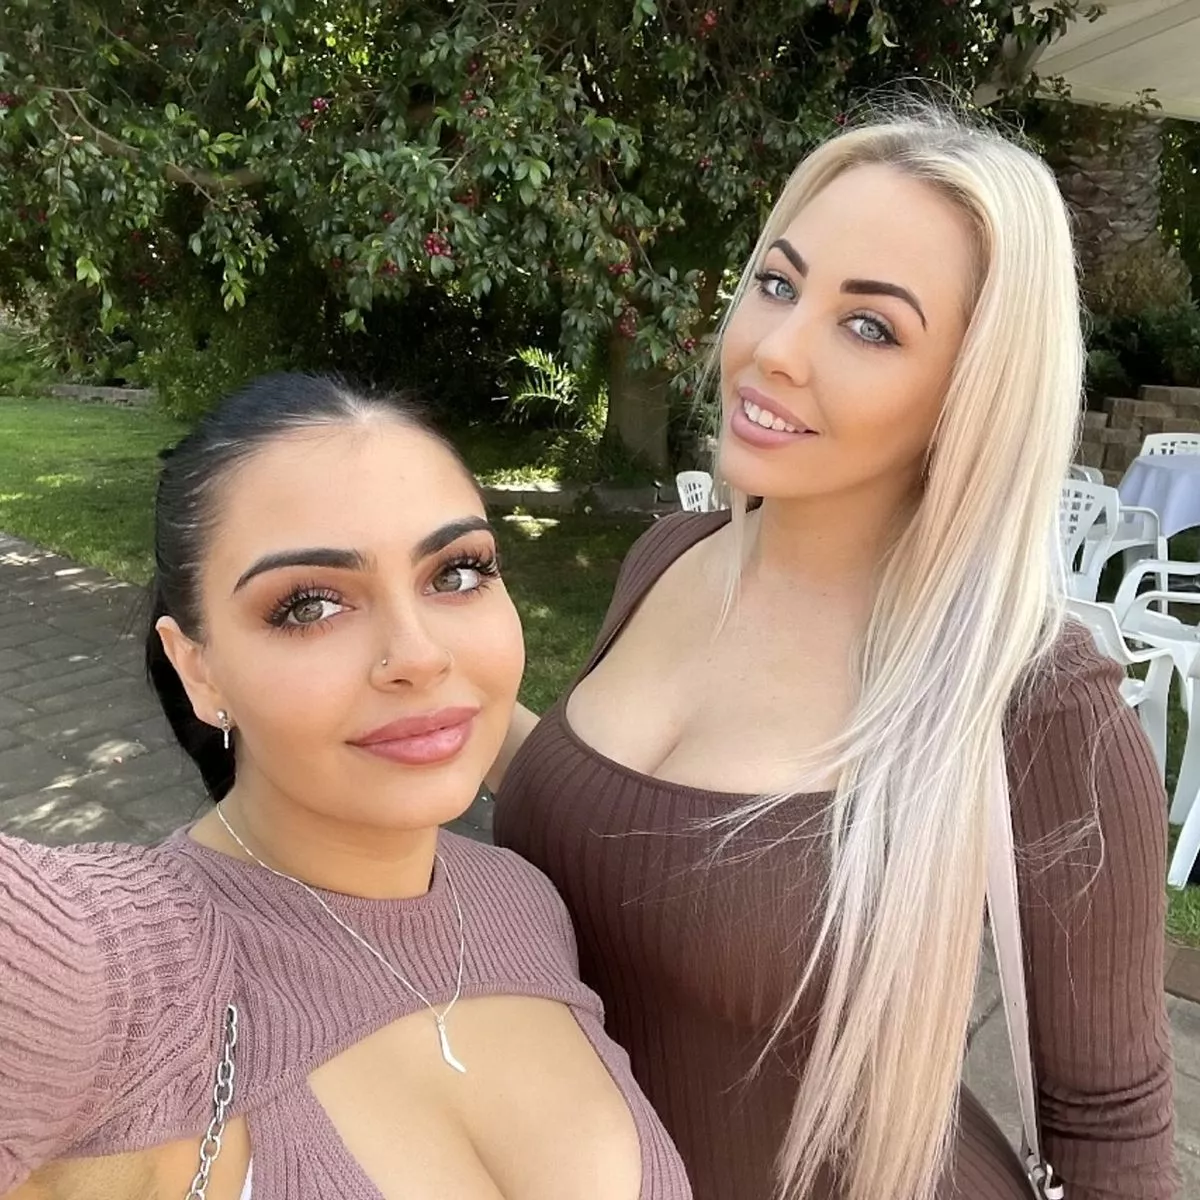 corey hyslop recommends mother daughter onlyfans pic